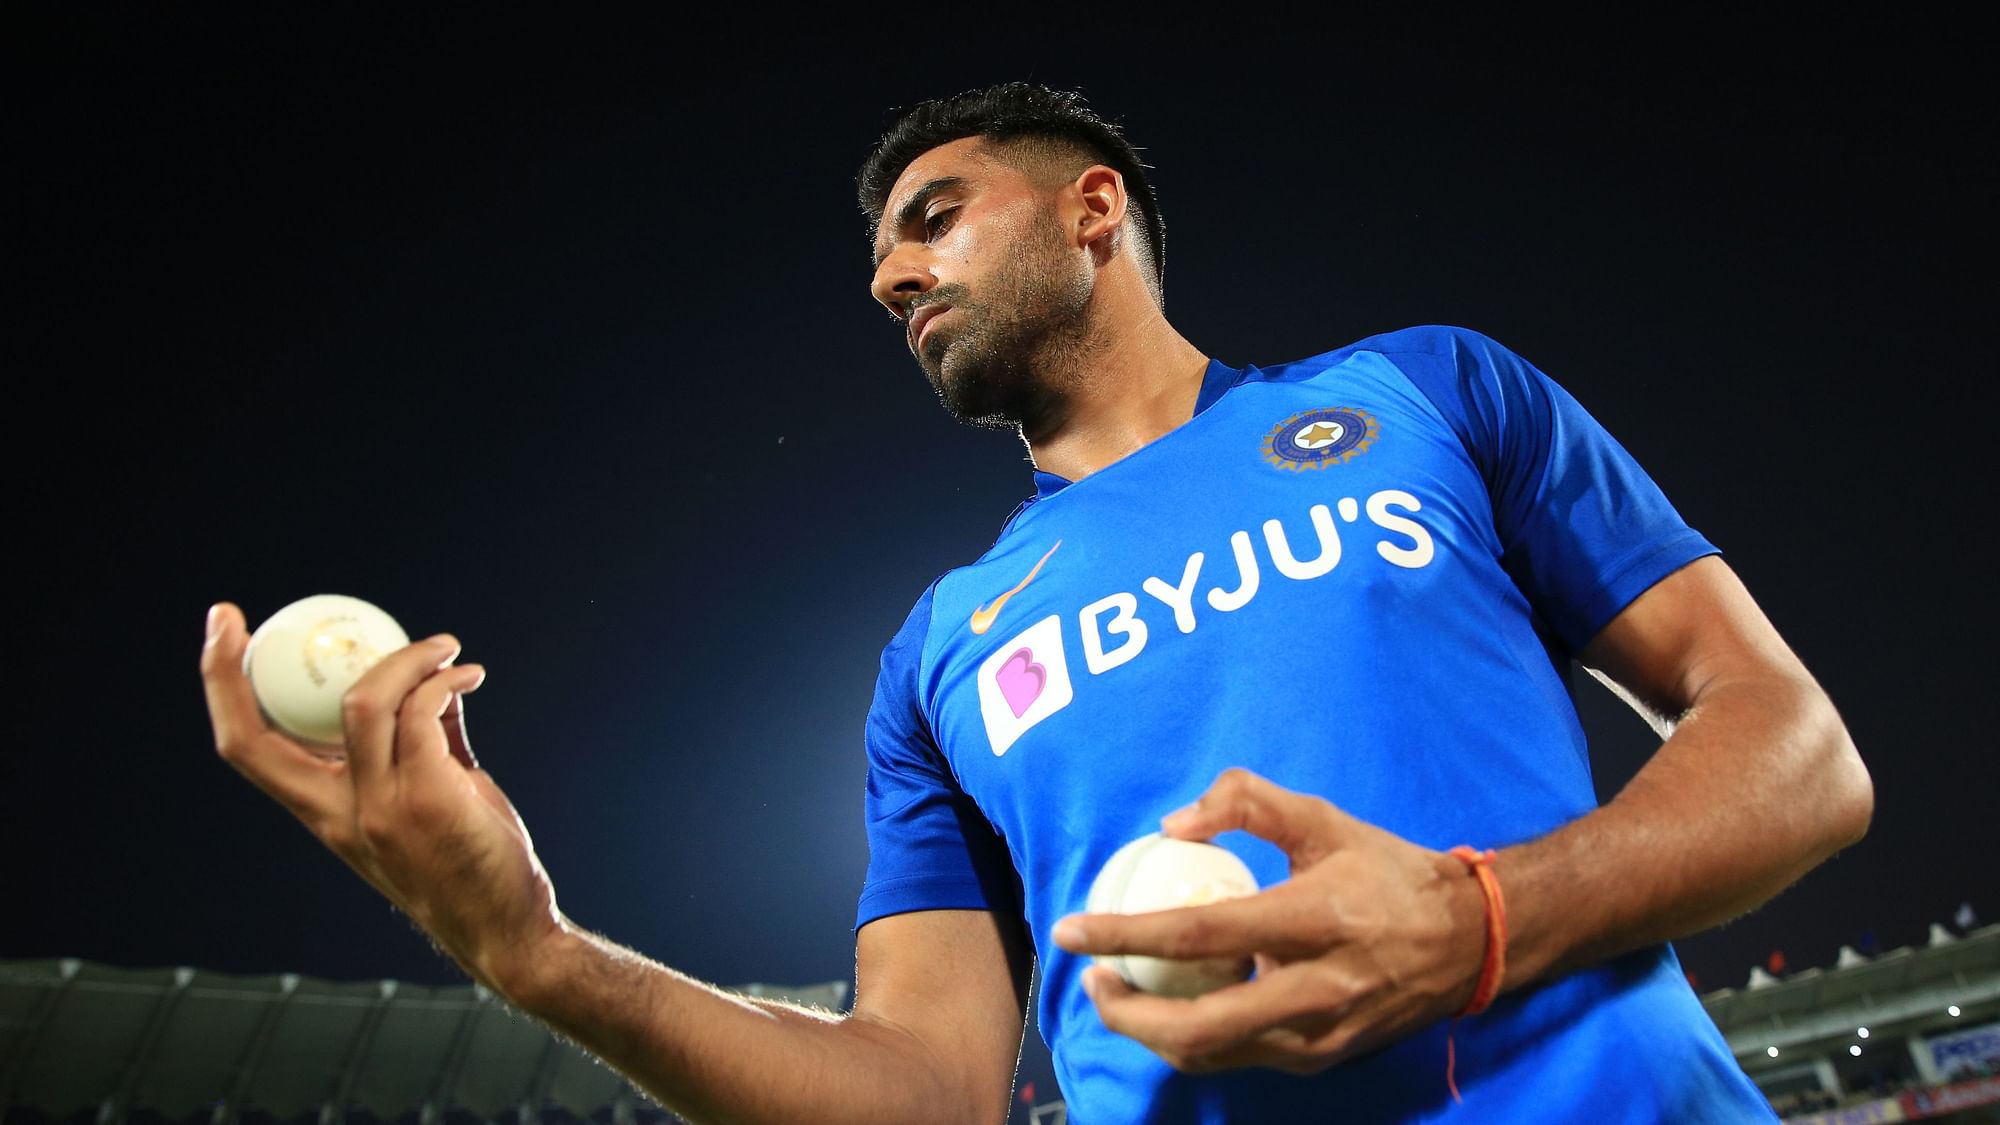 The postponement of IPL 2020 due to the COVID-19 pandemic has come as a blessing in disguise for Deepak Chahar.